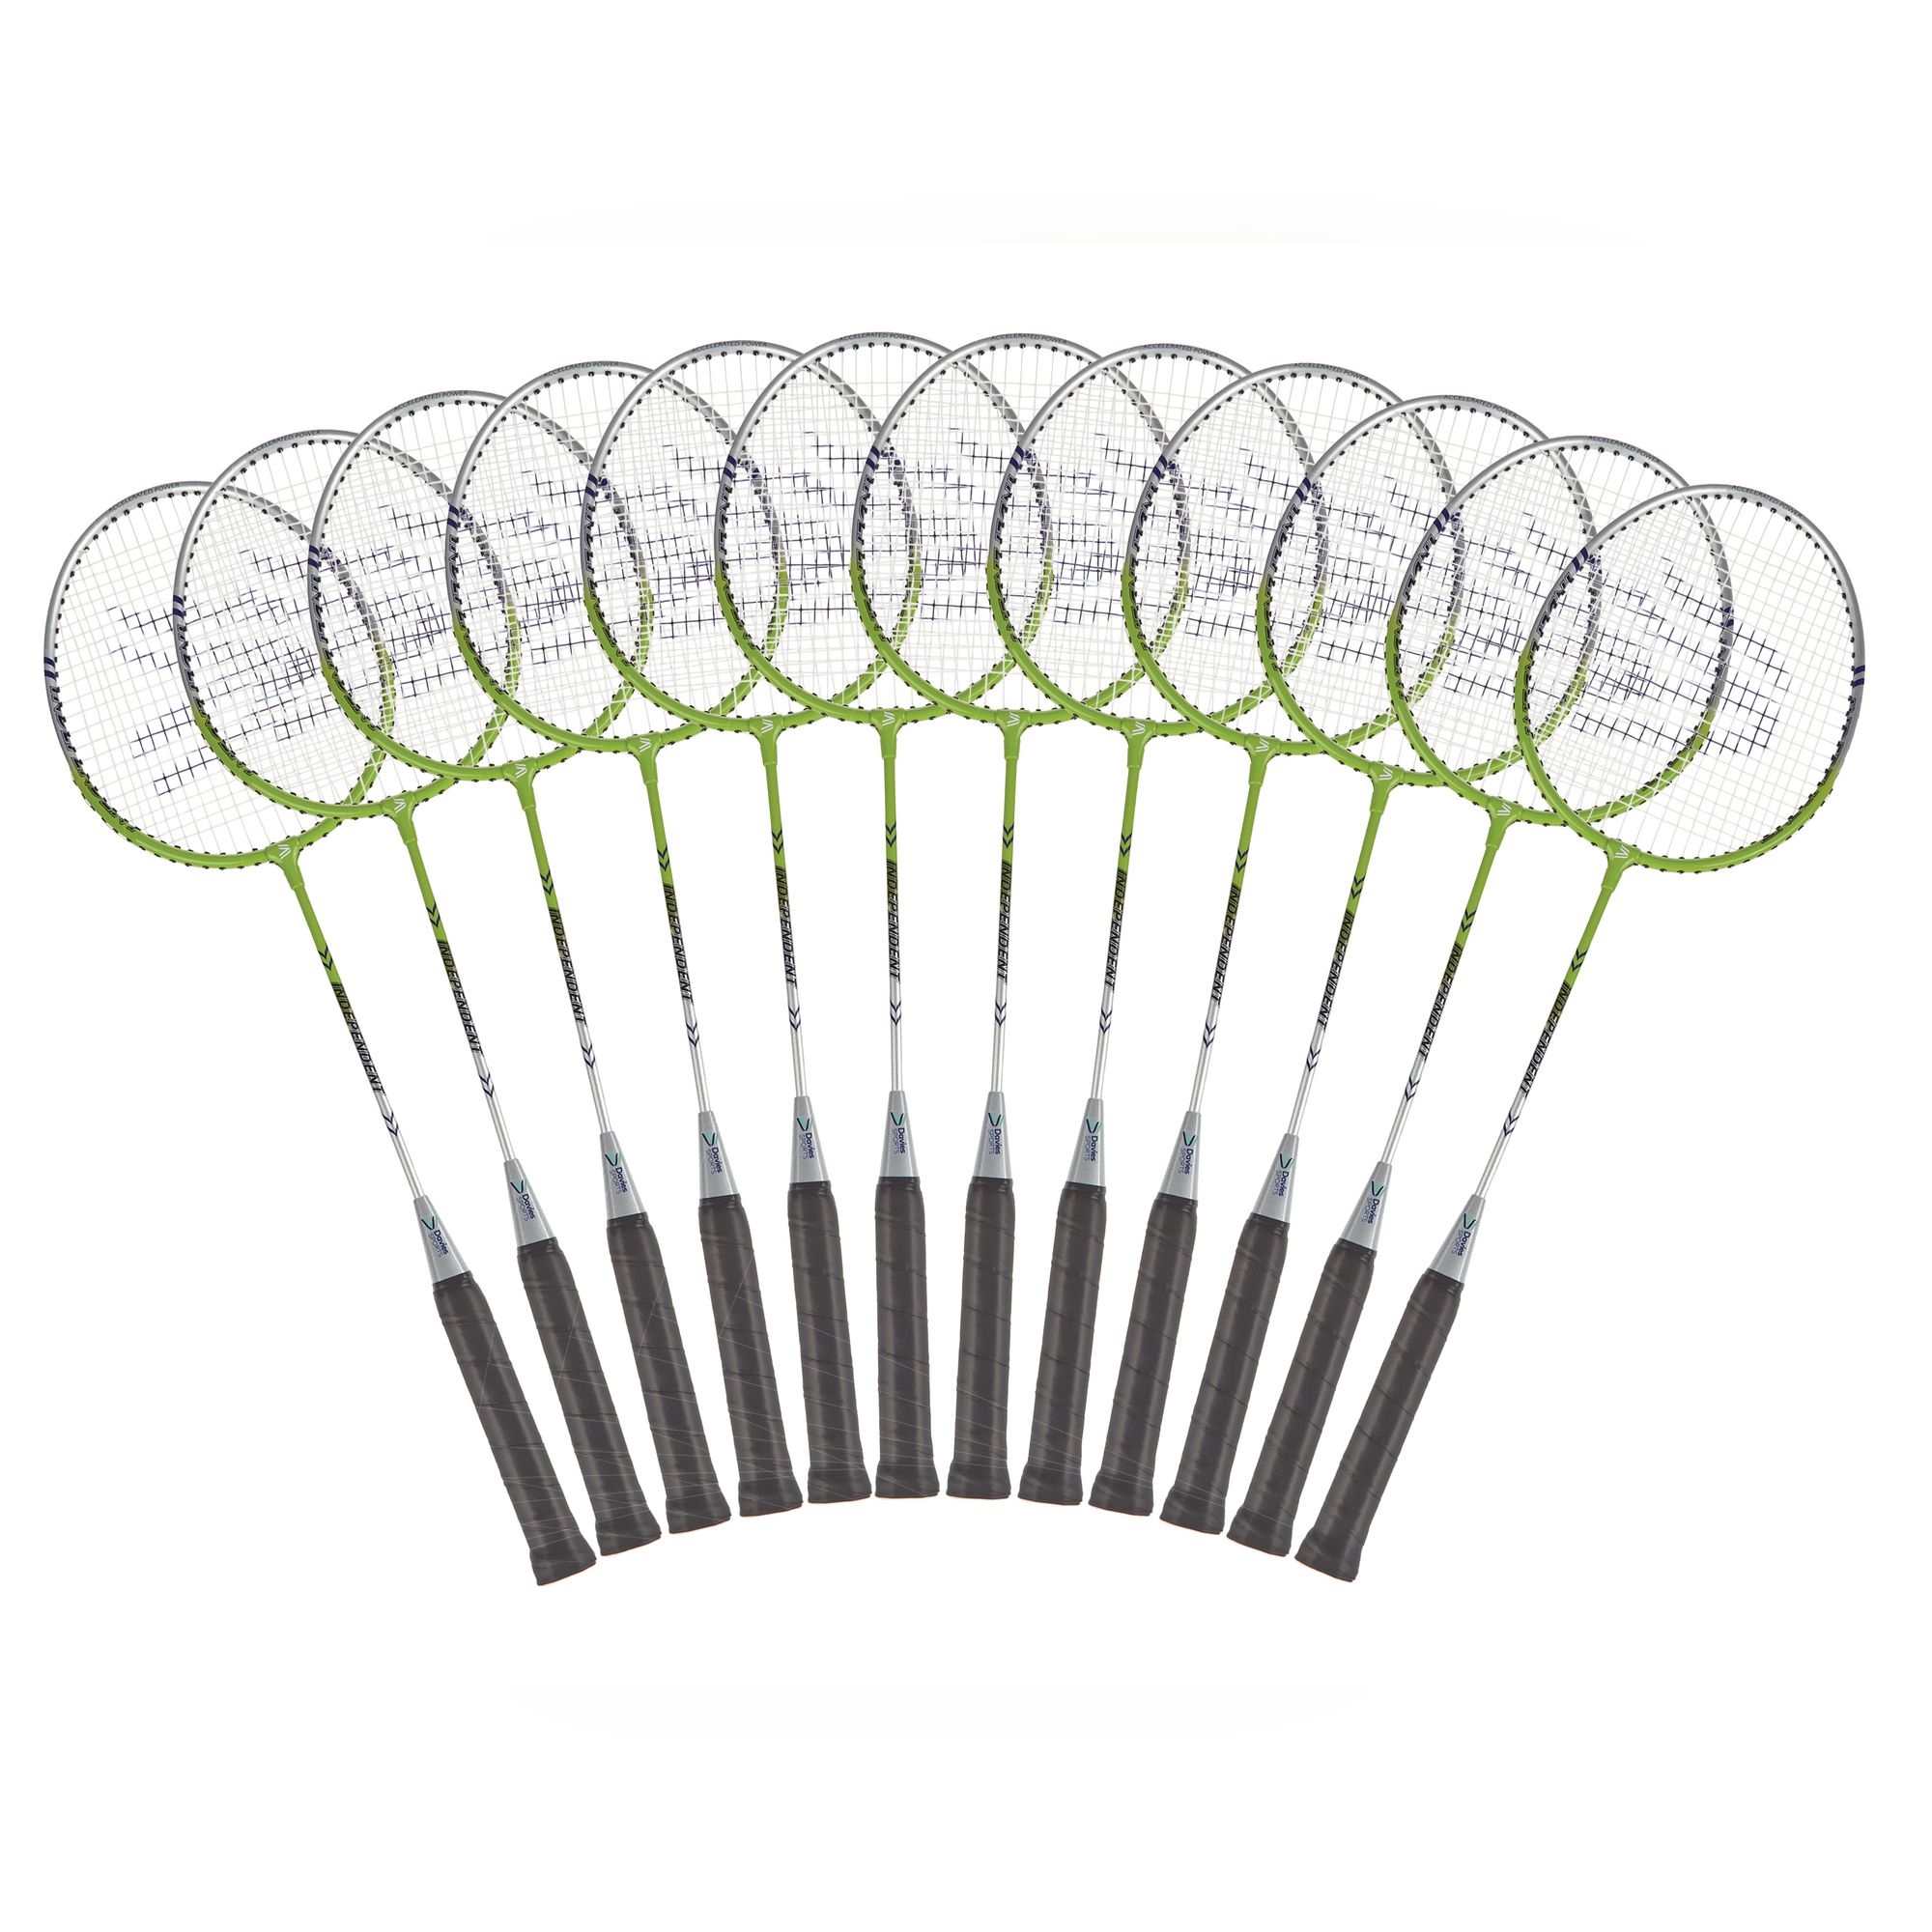 Davies Sports Independent Racquet - Pack of 12